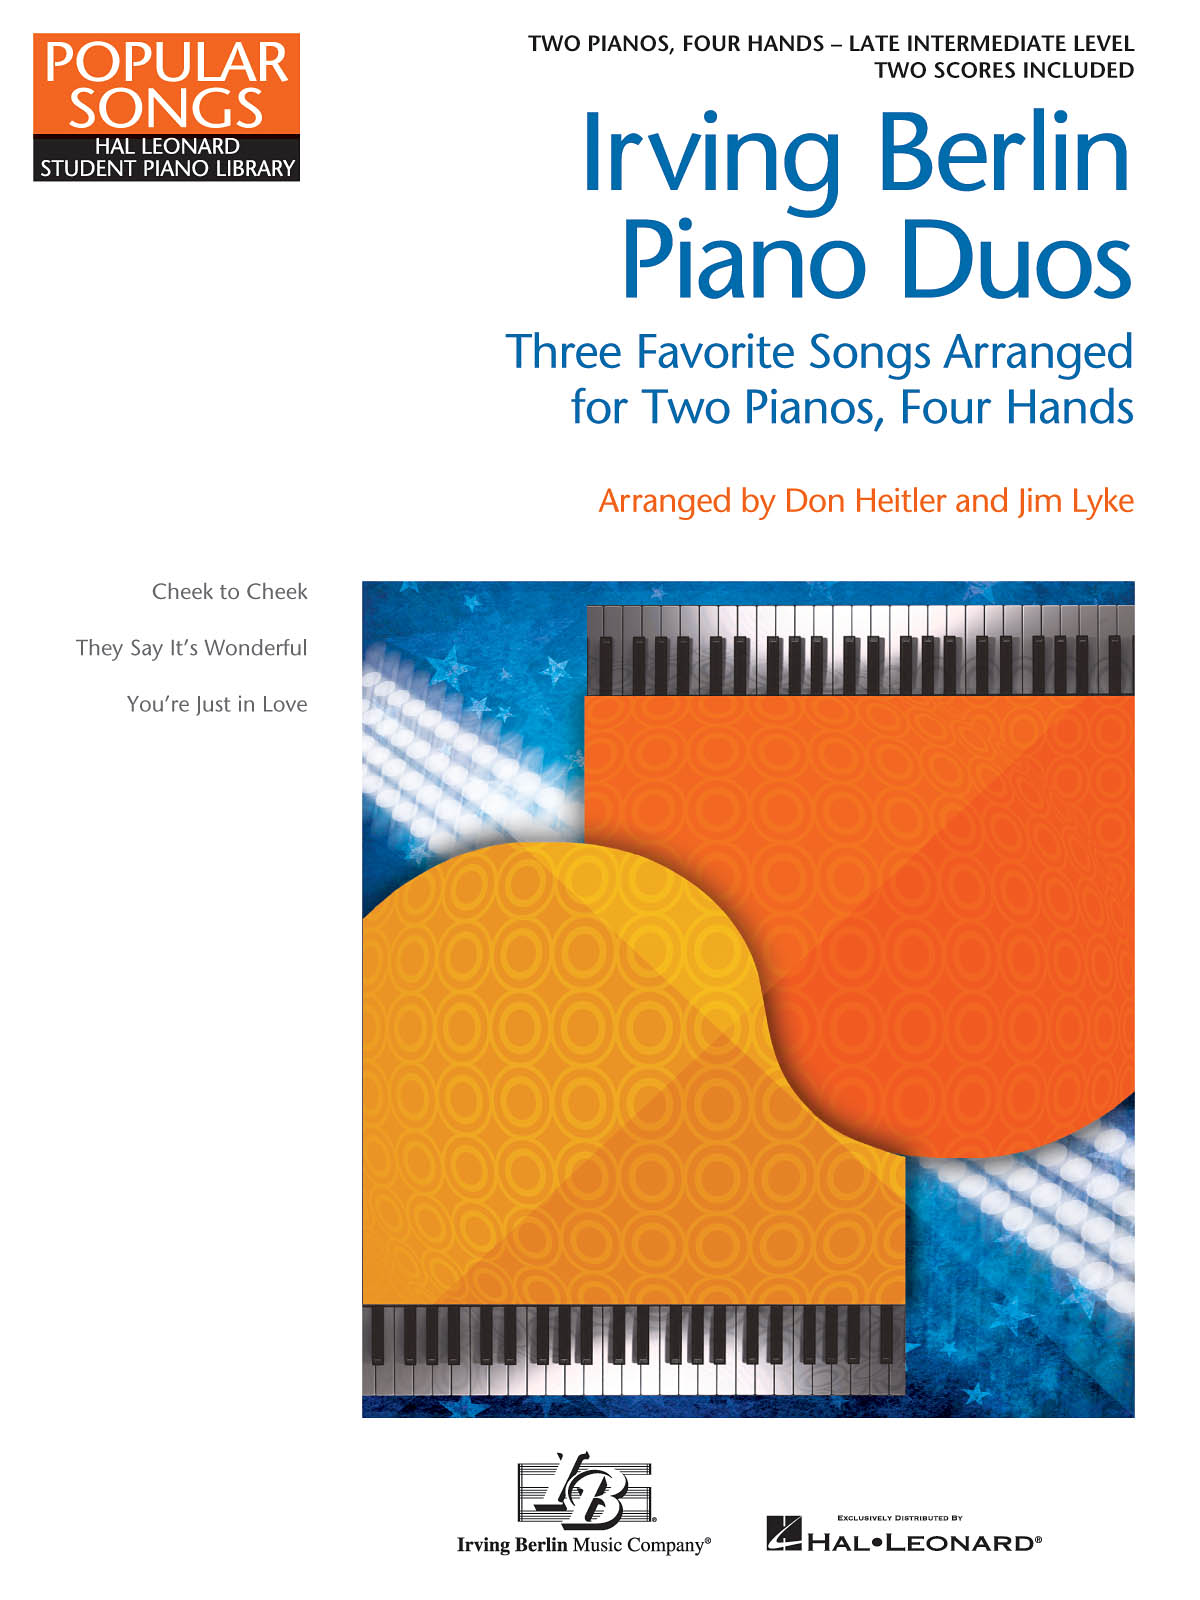 Irving Berlin Piano Duos(Three Favorite Songs Arranged fuer 2 Pianos, 4 Hands)